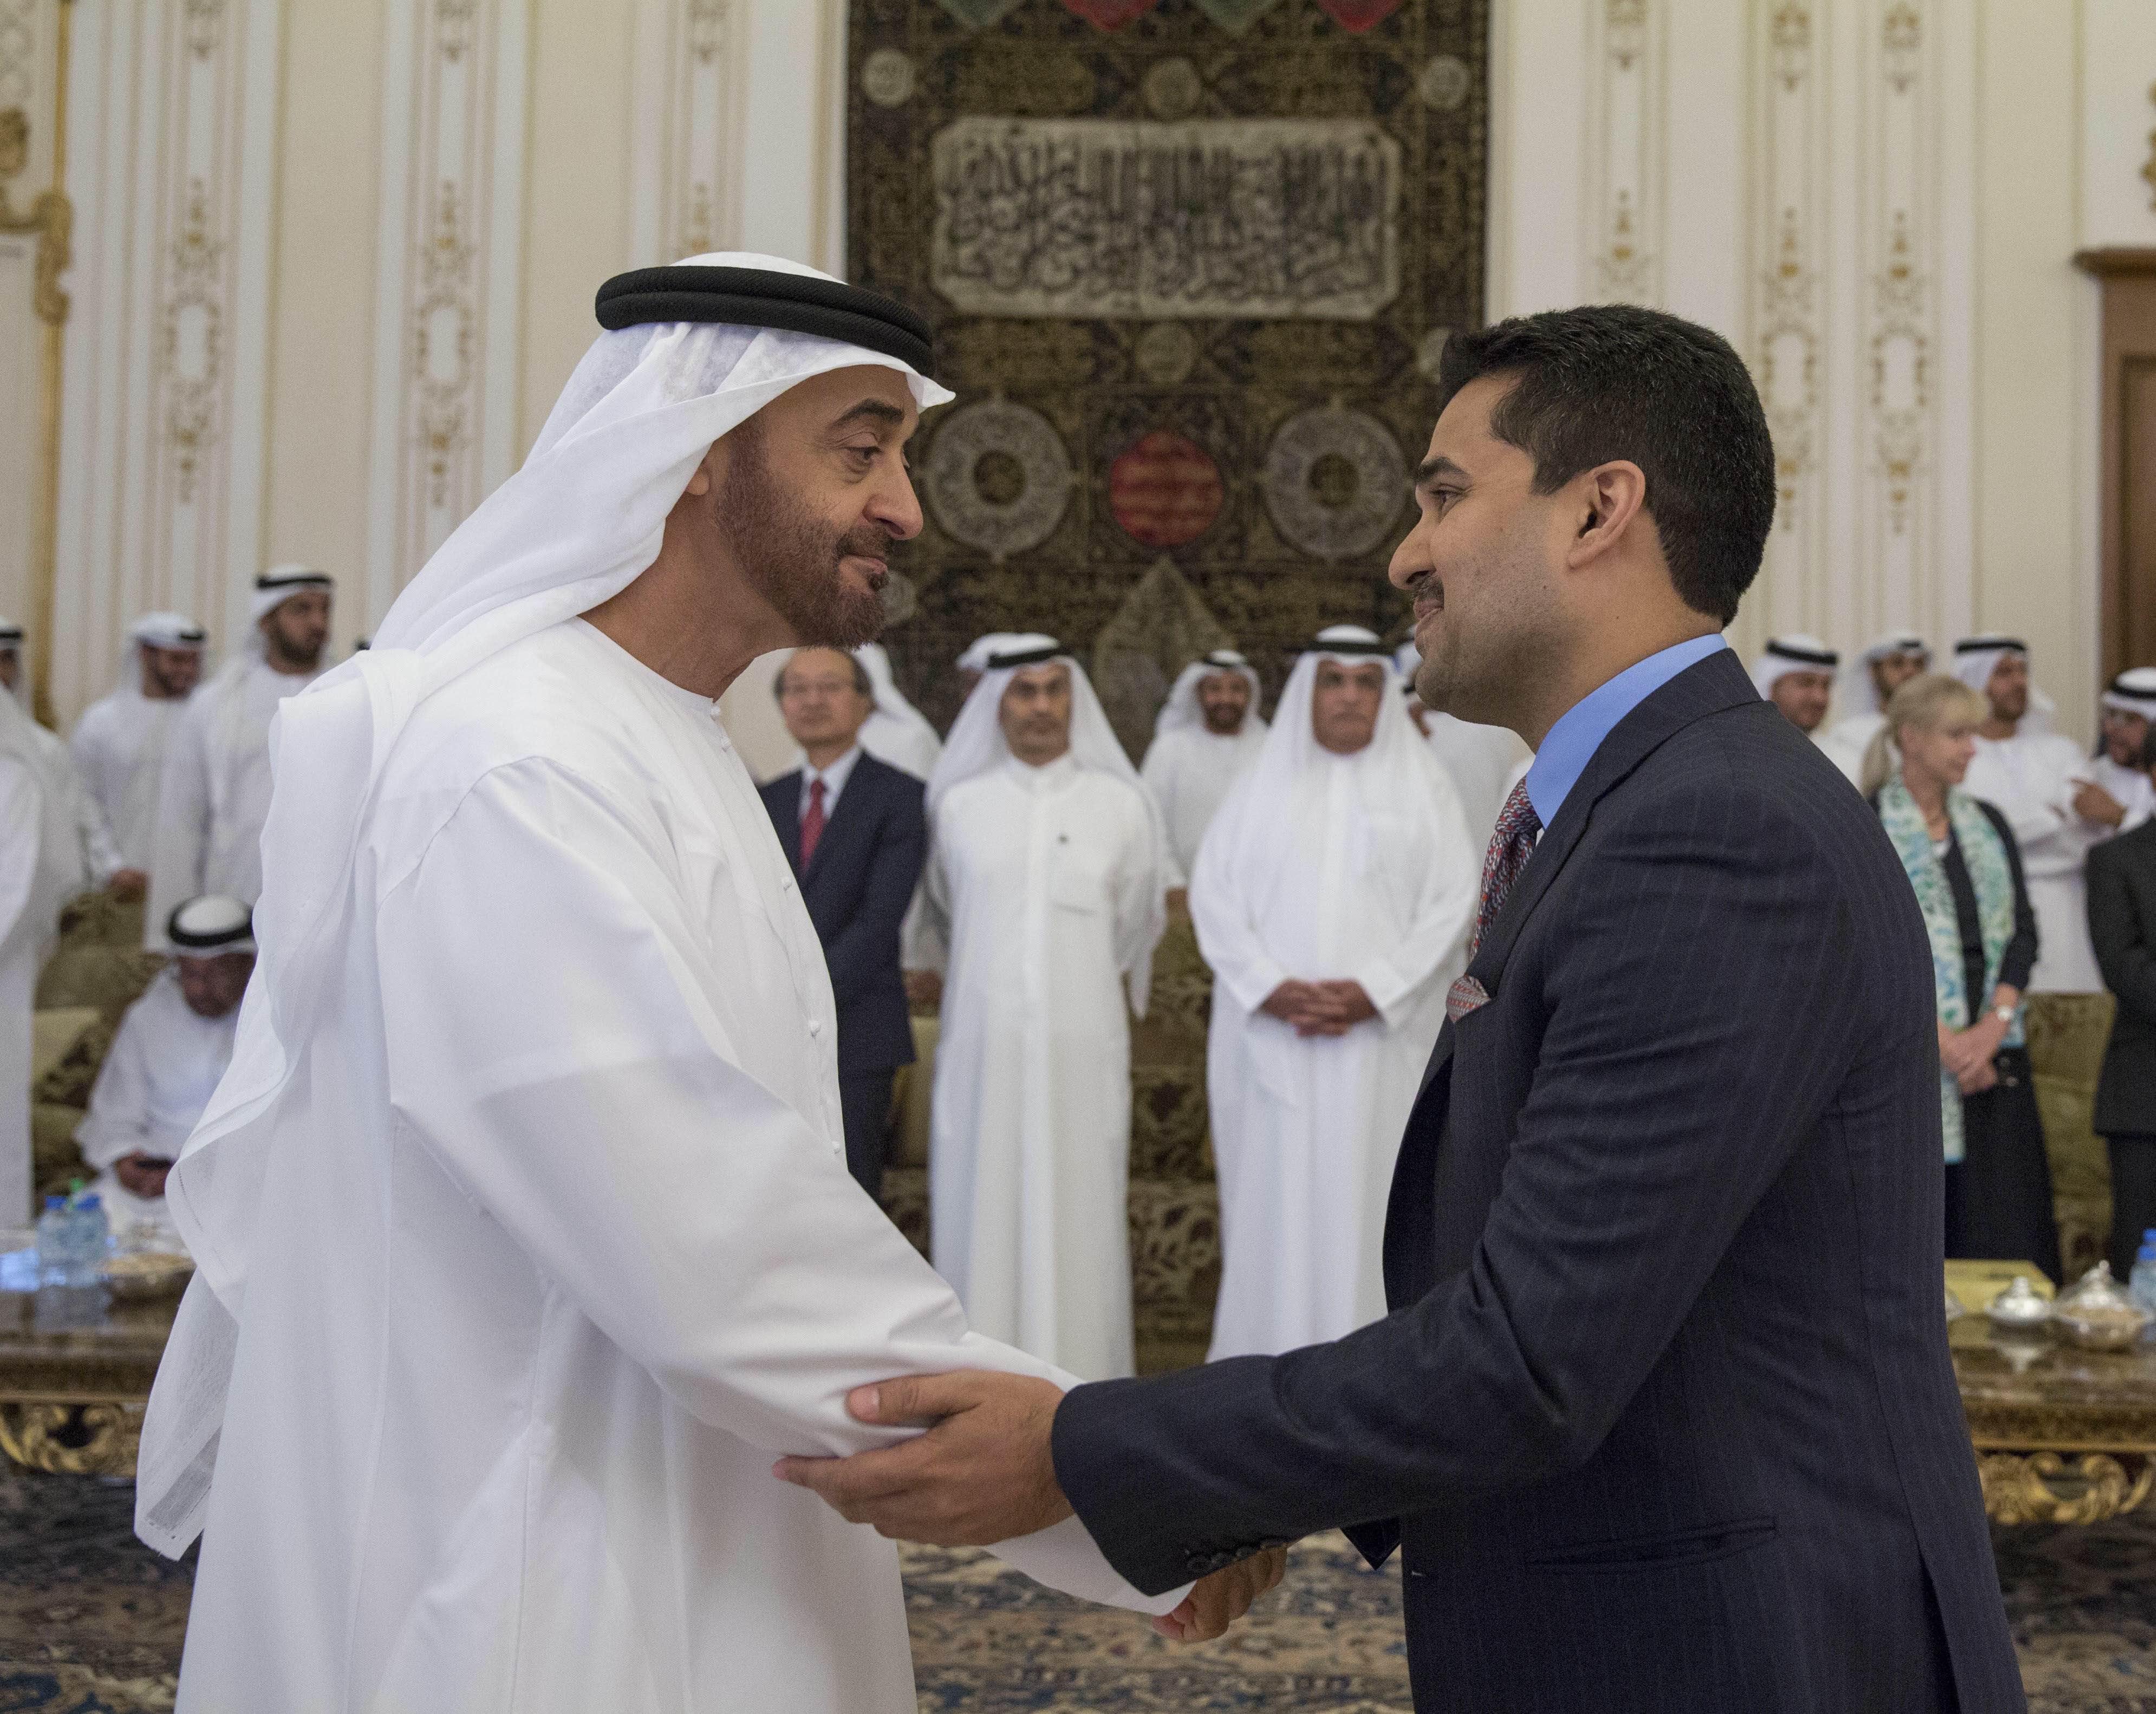 With H.H. Sheikh Mohammad Bin Zayed Al Nahyan, Crown Prince of Abu Dhabi and Deputy Supreme Commander of the UAE Armed Forces